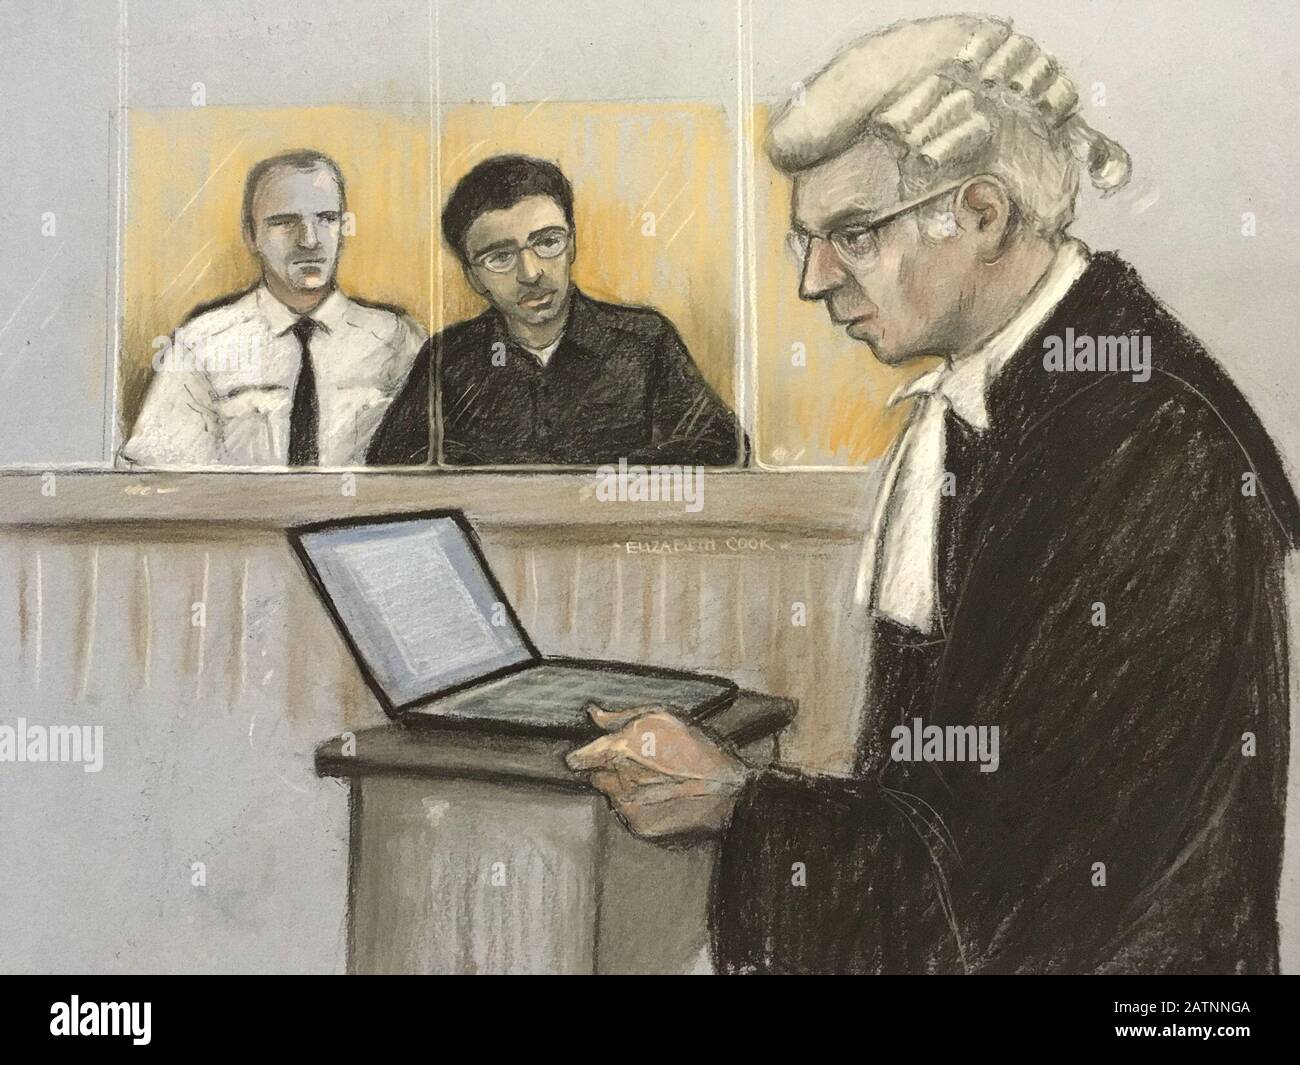 Court artist sketch dated 27/01/20 by Elizabeth Cook of Duncan Penny QC (prosecution) on his feet as Hashem Abedi, younger brother of the Manchester Arena bomber, sits in the dock at the Old Bailey in London accused of mass murder. Stock Photo